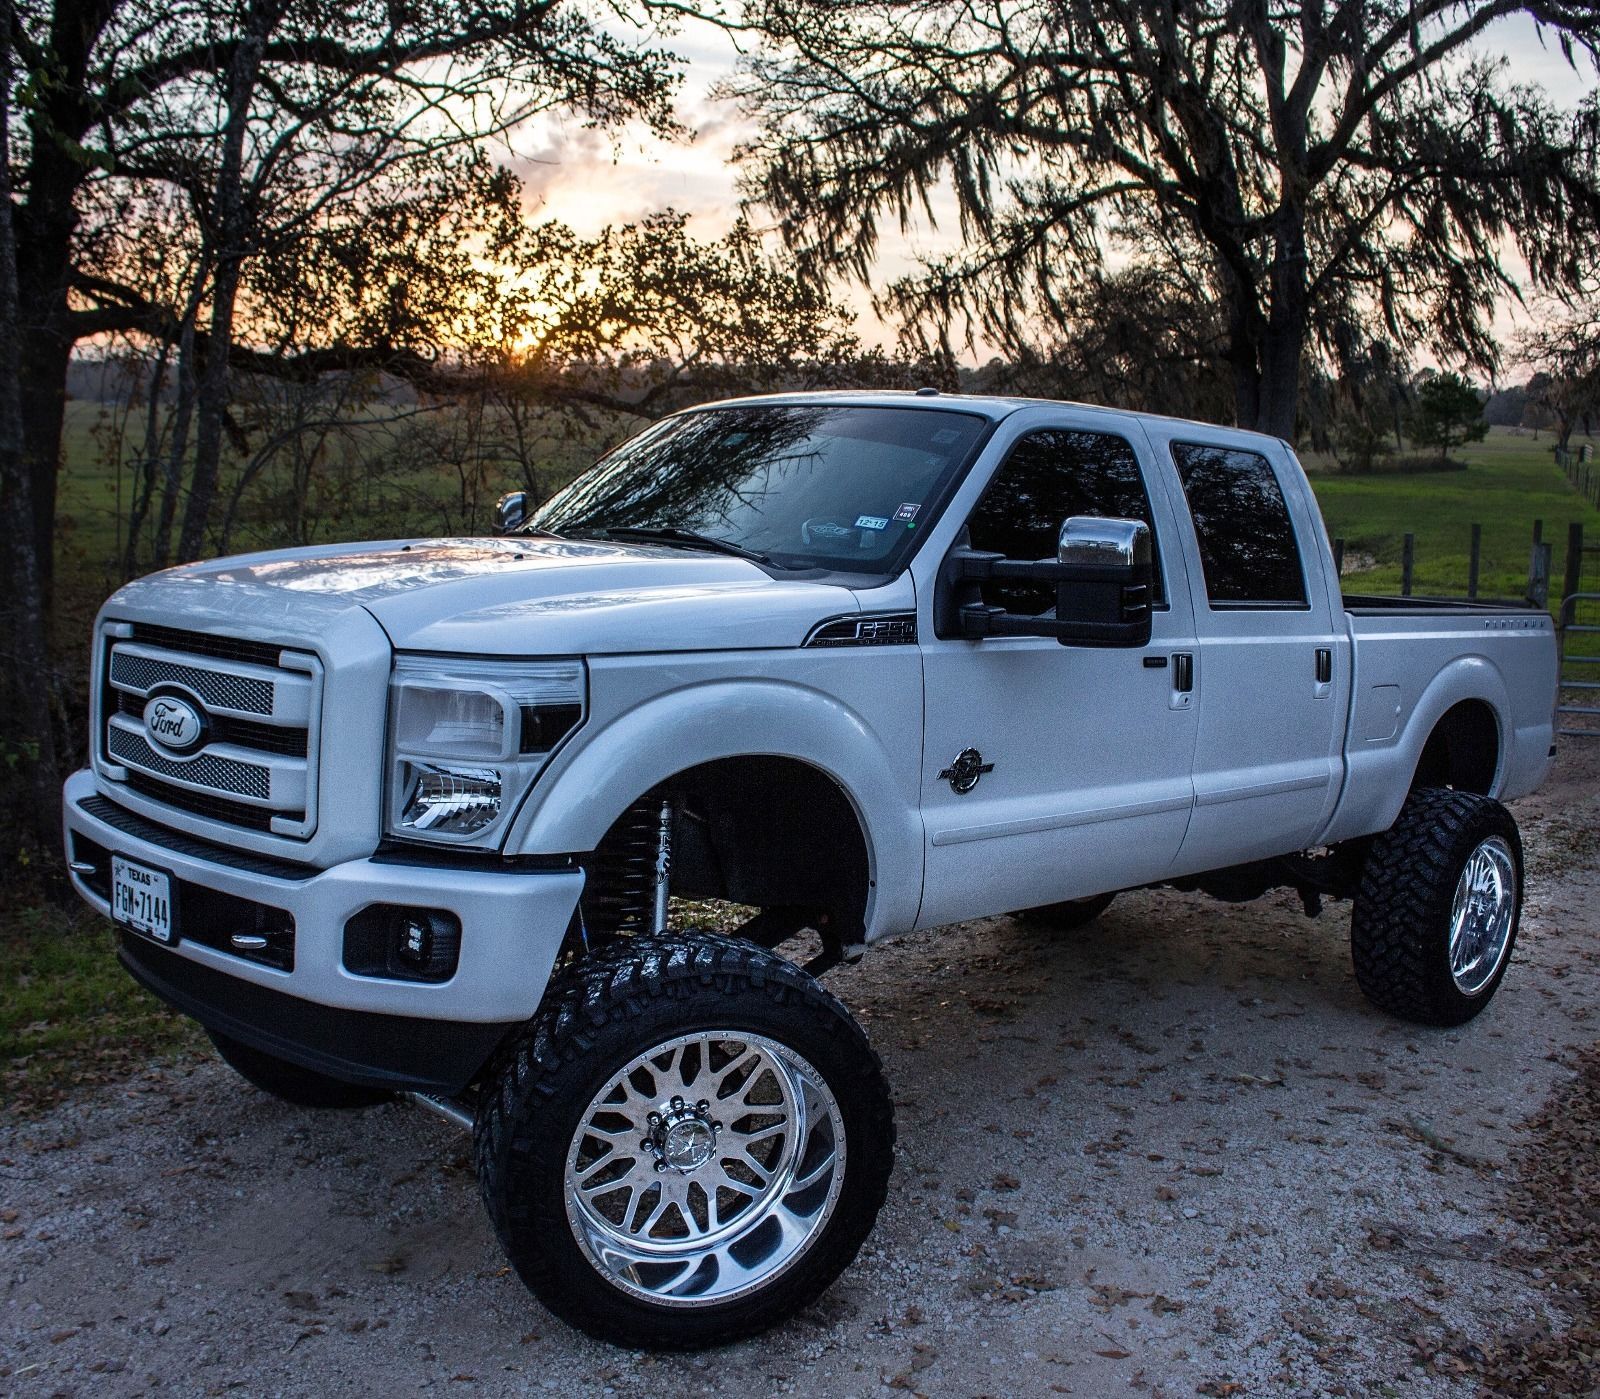 2013 Ford F250 Platinum Show Truck Lifted Trucks For Sale